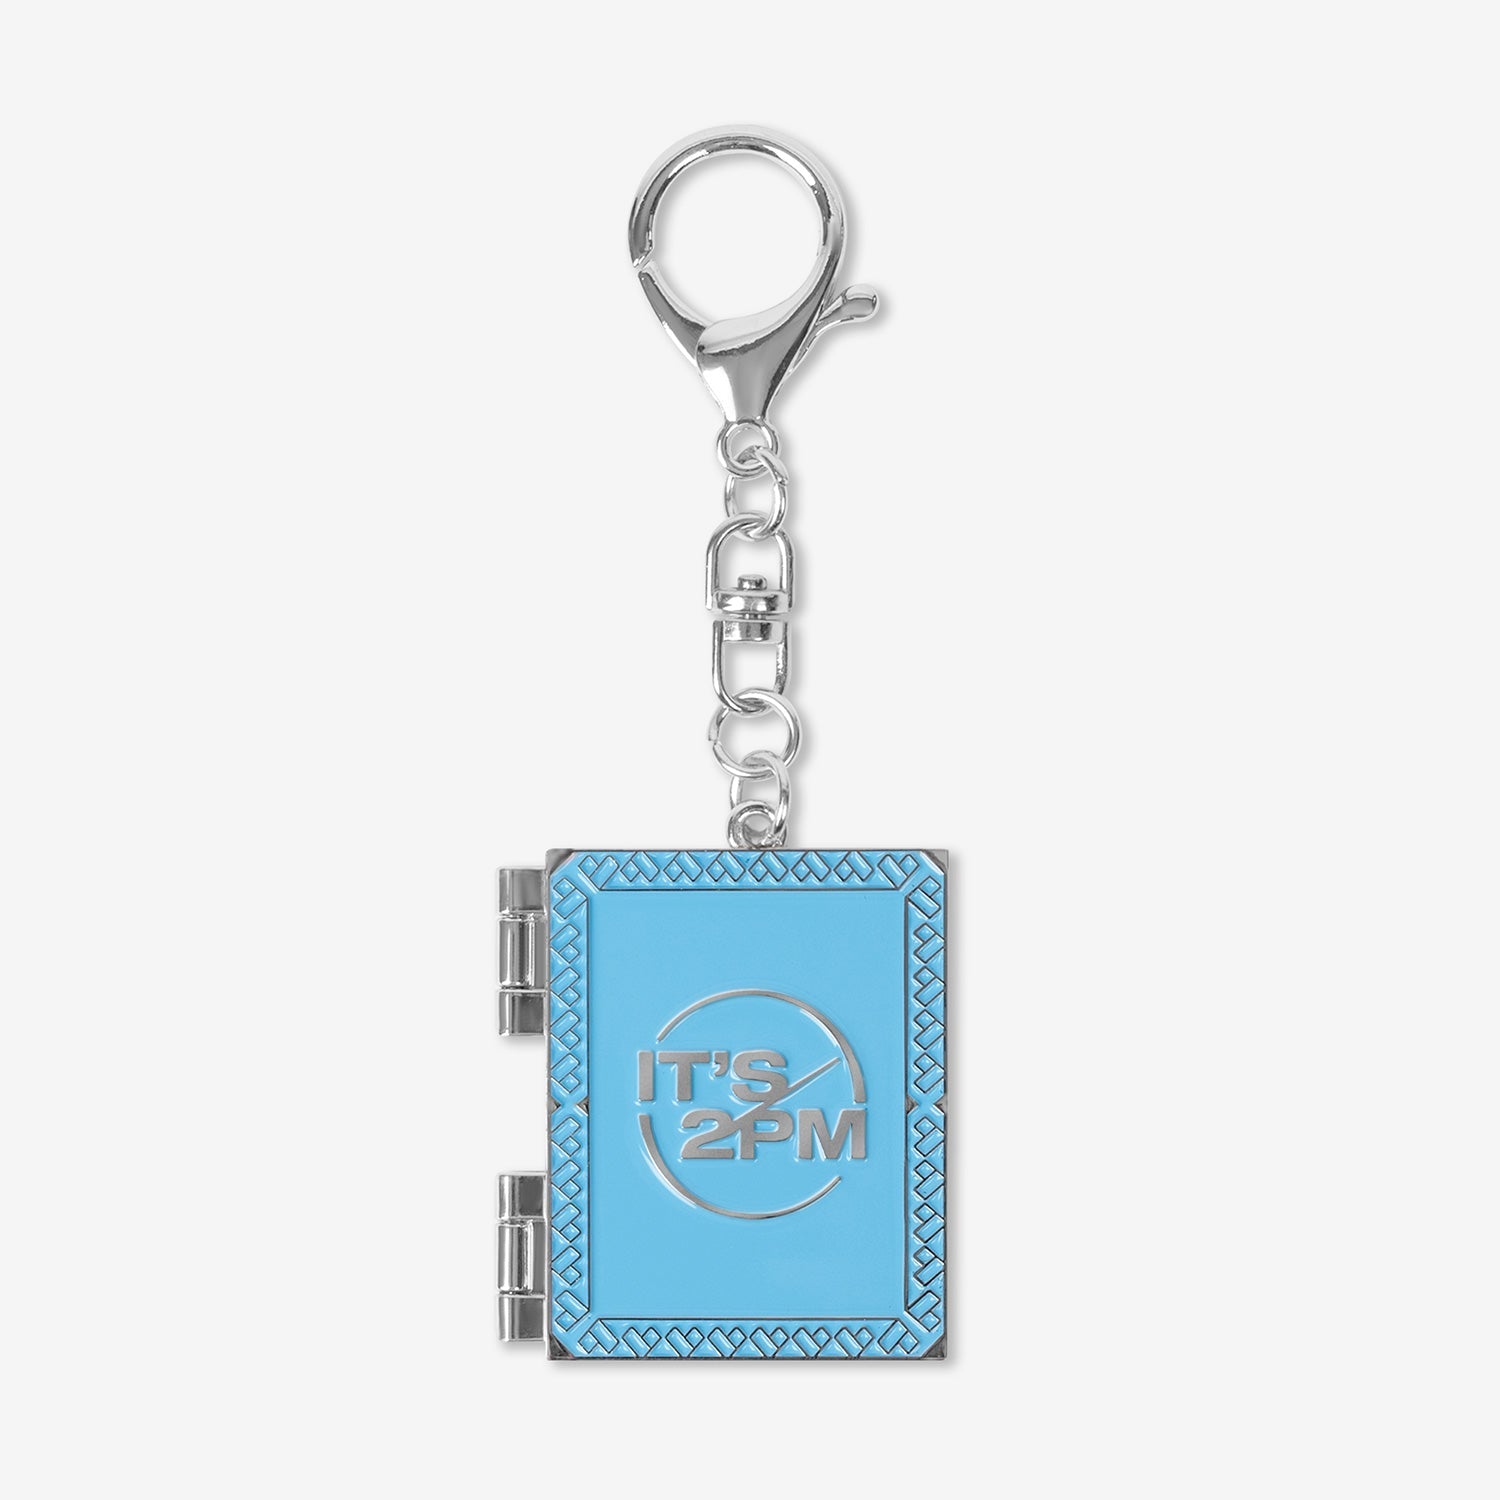 PHOTO KEY HOLDER - WOOYOUNG / 2PM『It's 2PM』